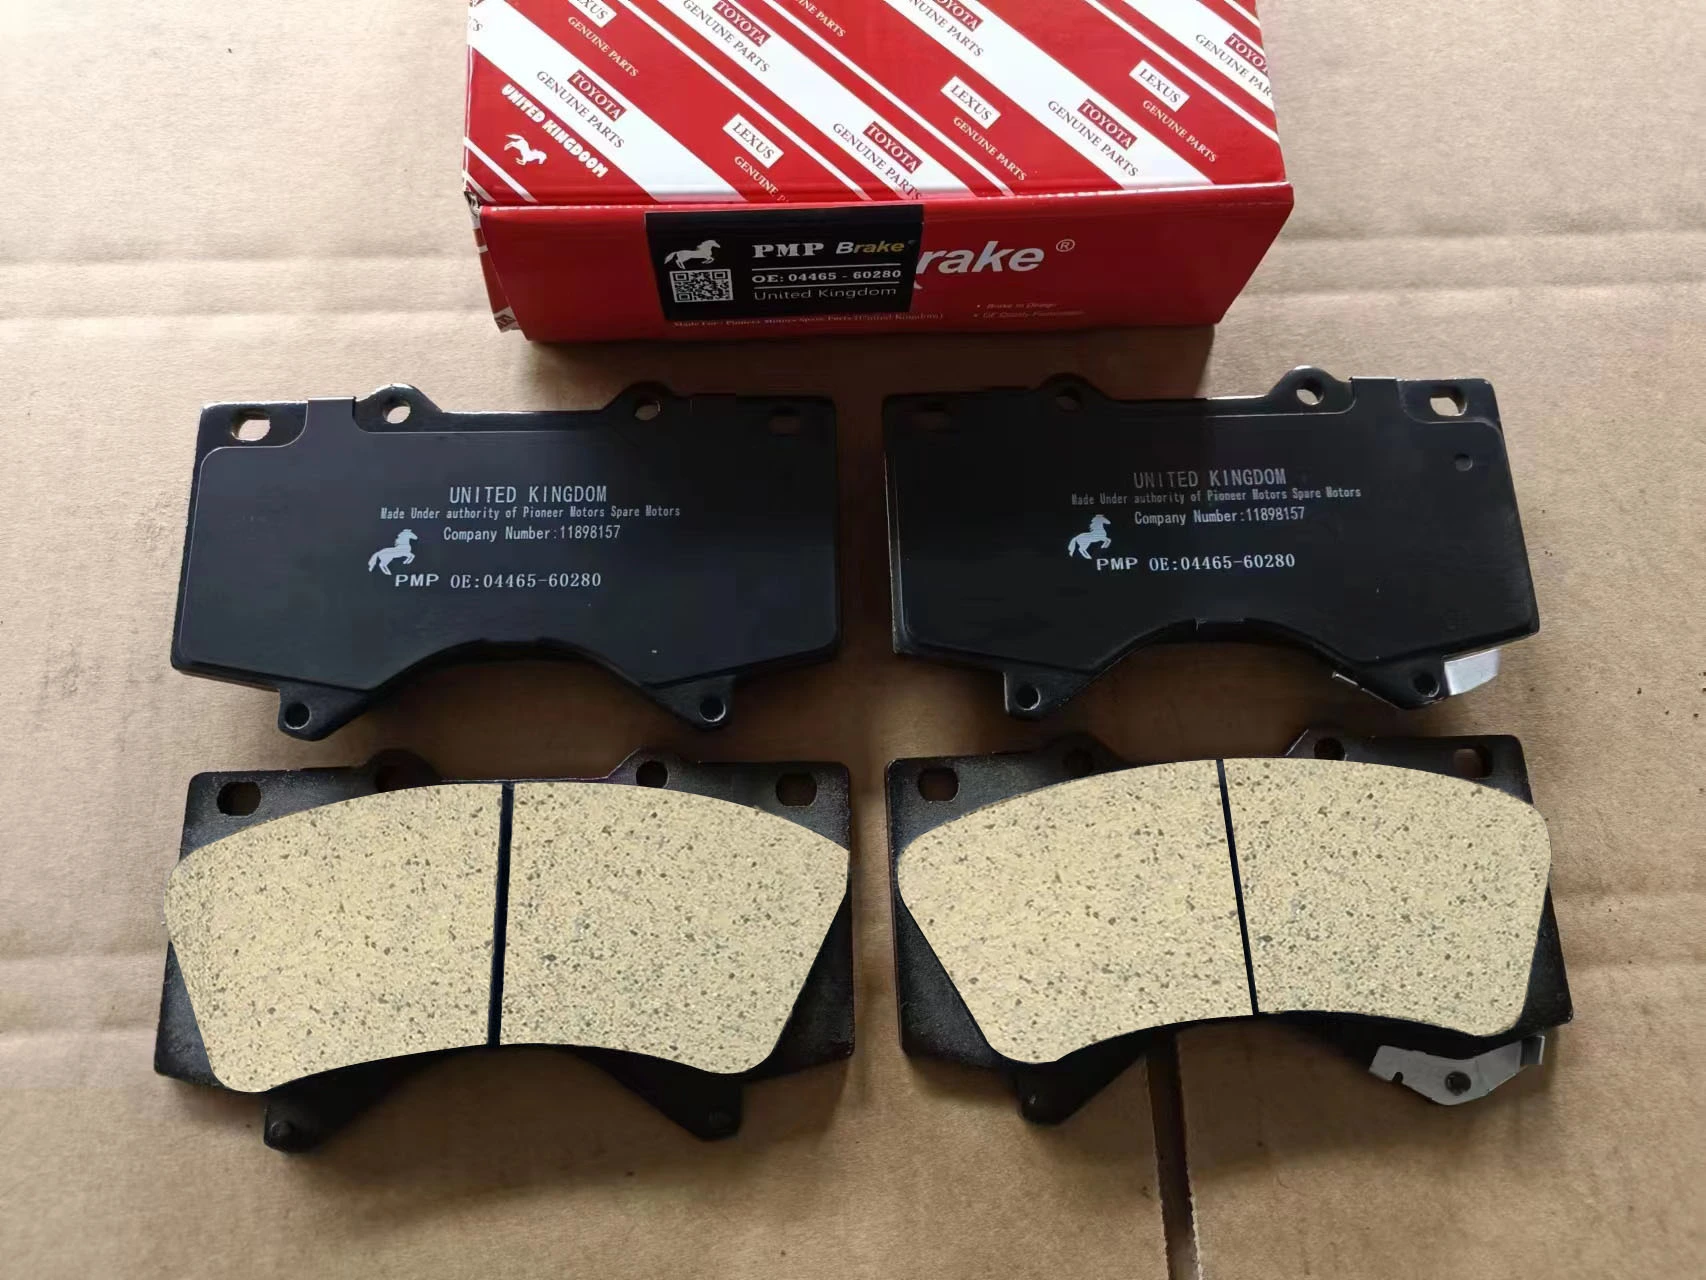 High-quality brake pads designed specifically for Toyota Corolla vehicles.